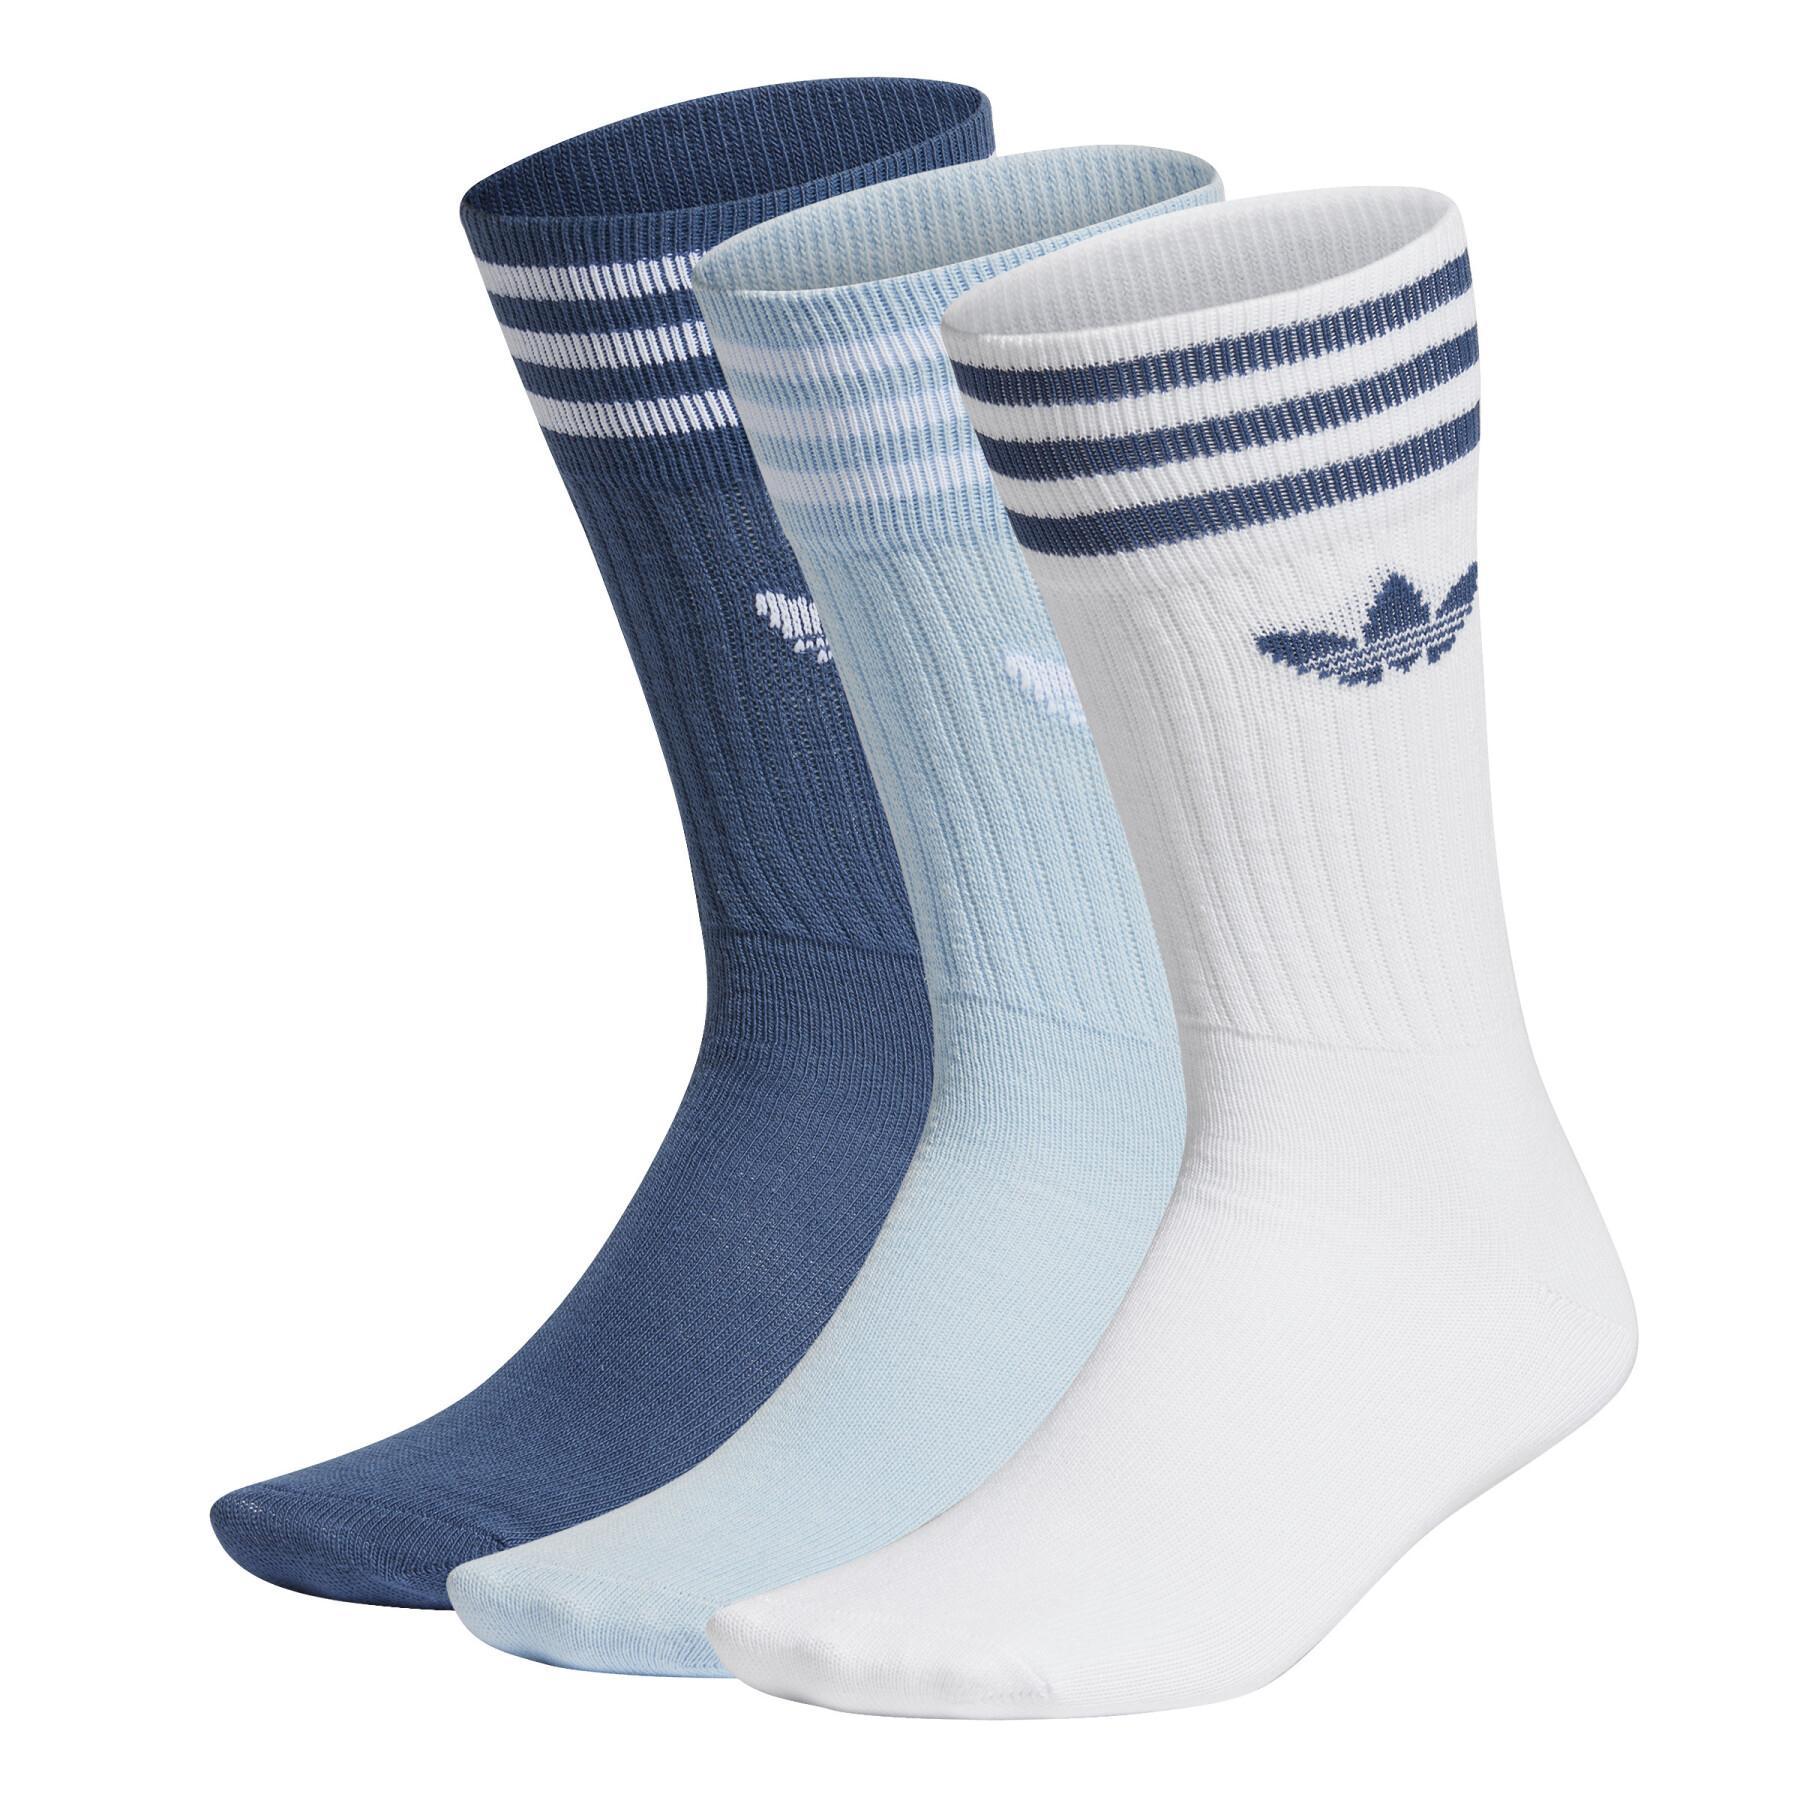 Chausettes adidas mi-mollet (3 paires)